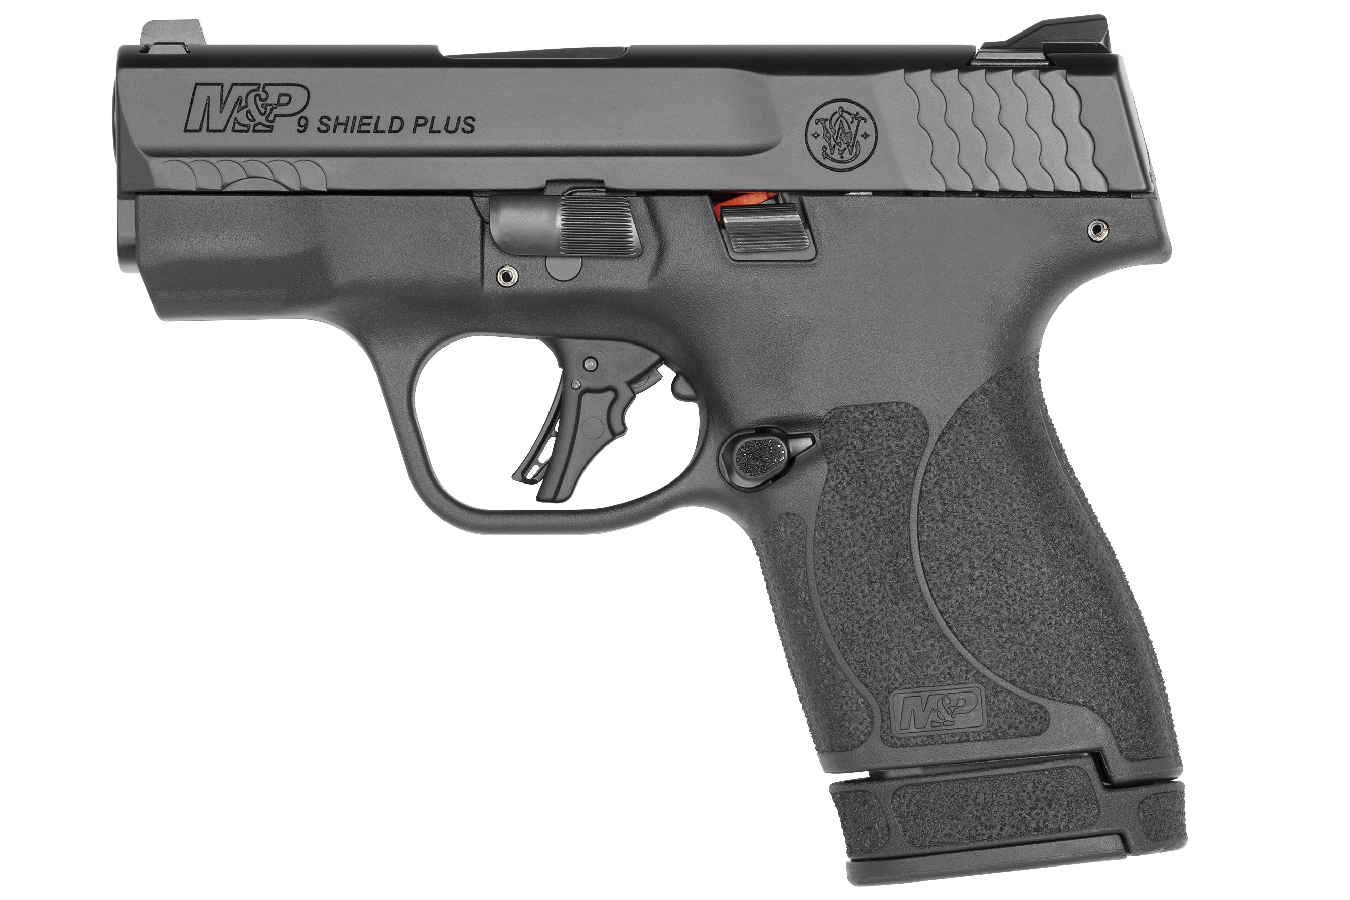 MP9 SHIELD PLUS 9MM MICRO COMPACT PISTOL WITH NO THUMB SAFETY